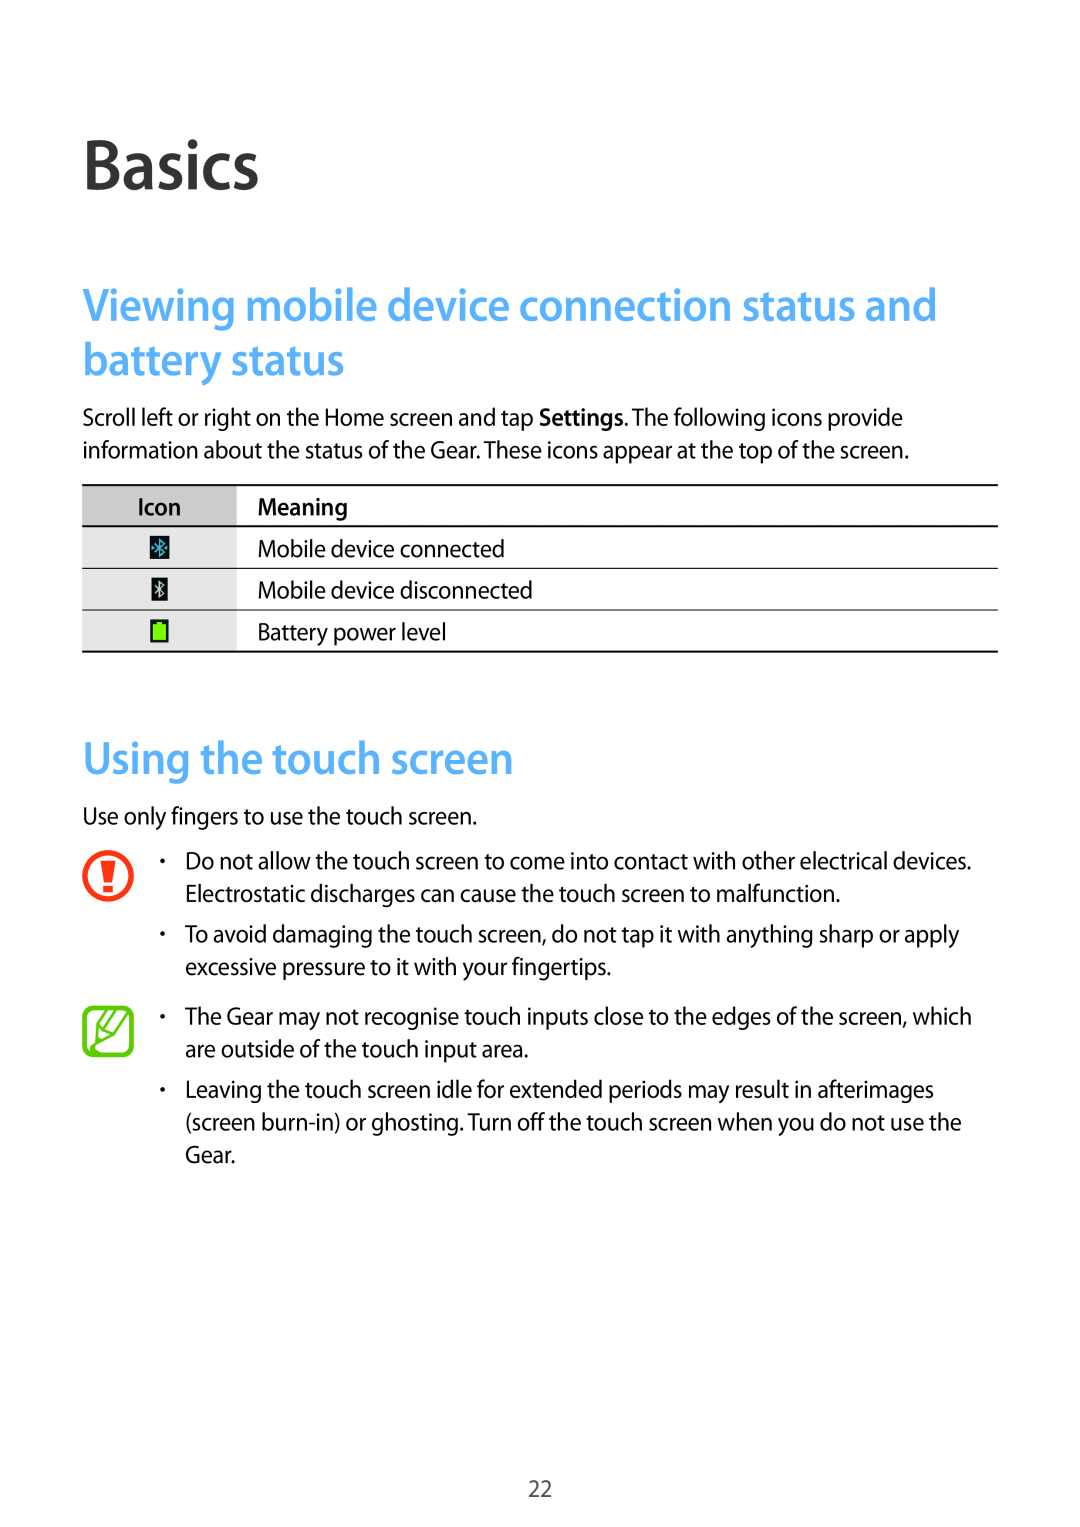 Samsung SM-R3810ZOAXSG manual Basics, Viewing mobile device connection status and battery status, Using the touch screen 